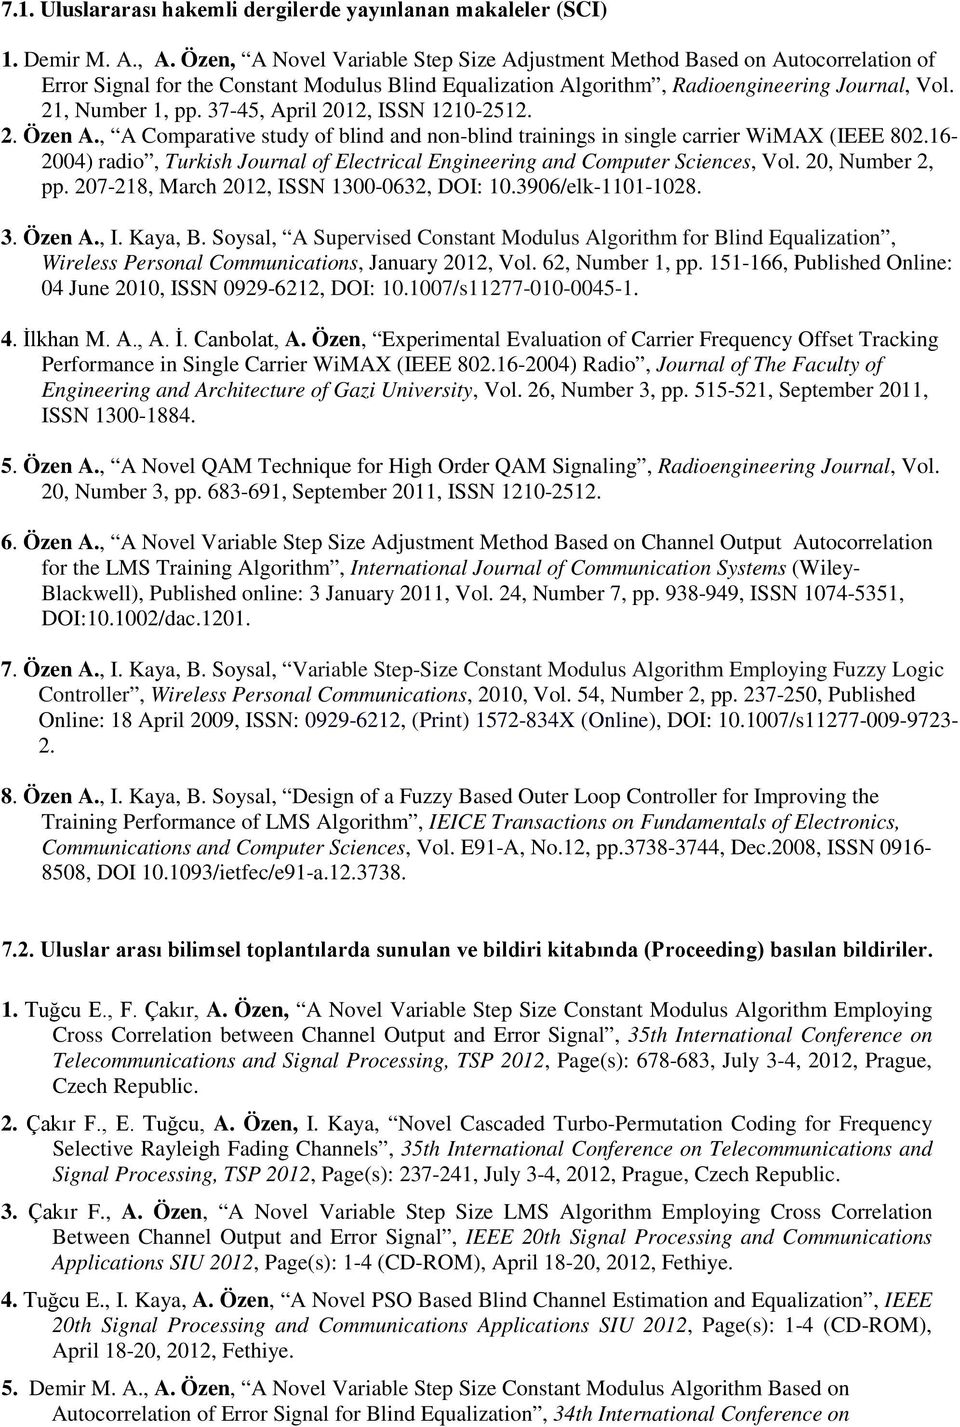 37-45, April 2012, ISSN 1210-2512. 2. Özen A., A Comparative study of blind and non-blind trainings in single carrier WiMAX (IEEE 802.